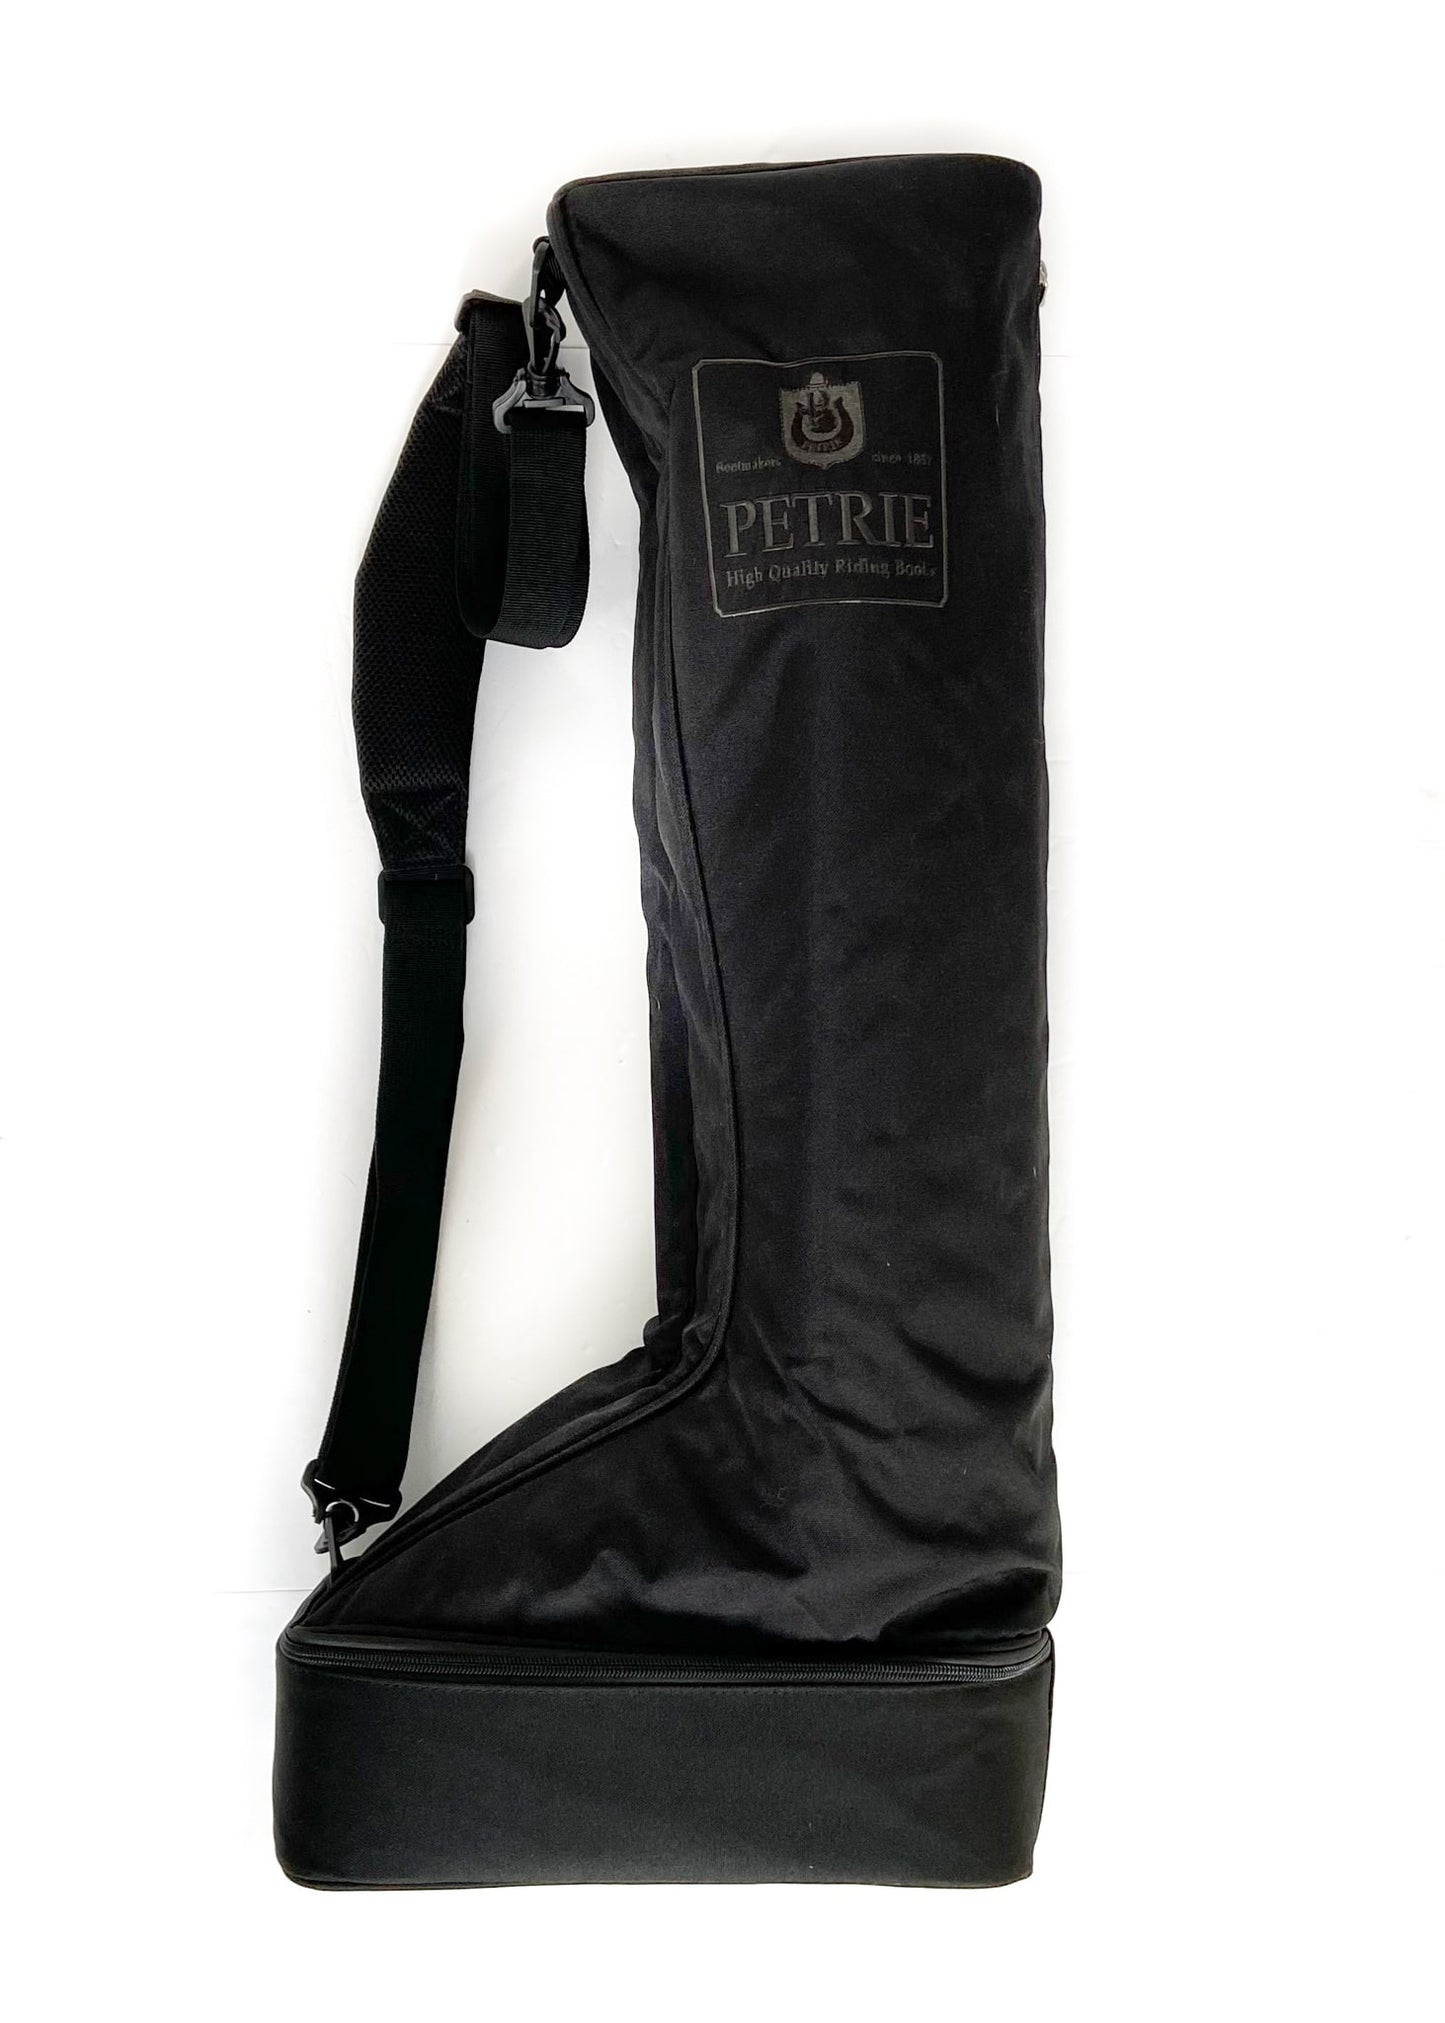 Petrie Boot Bag - Black - One Size